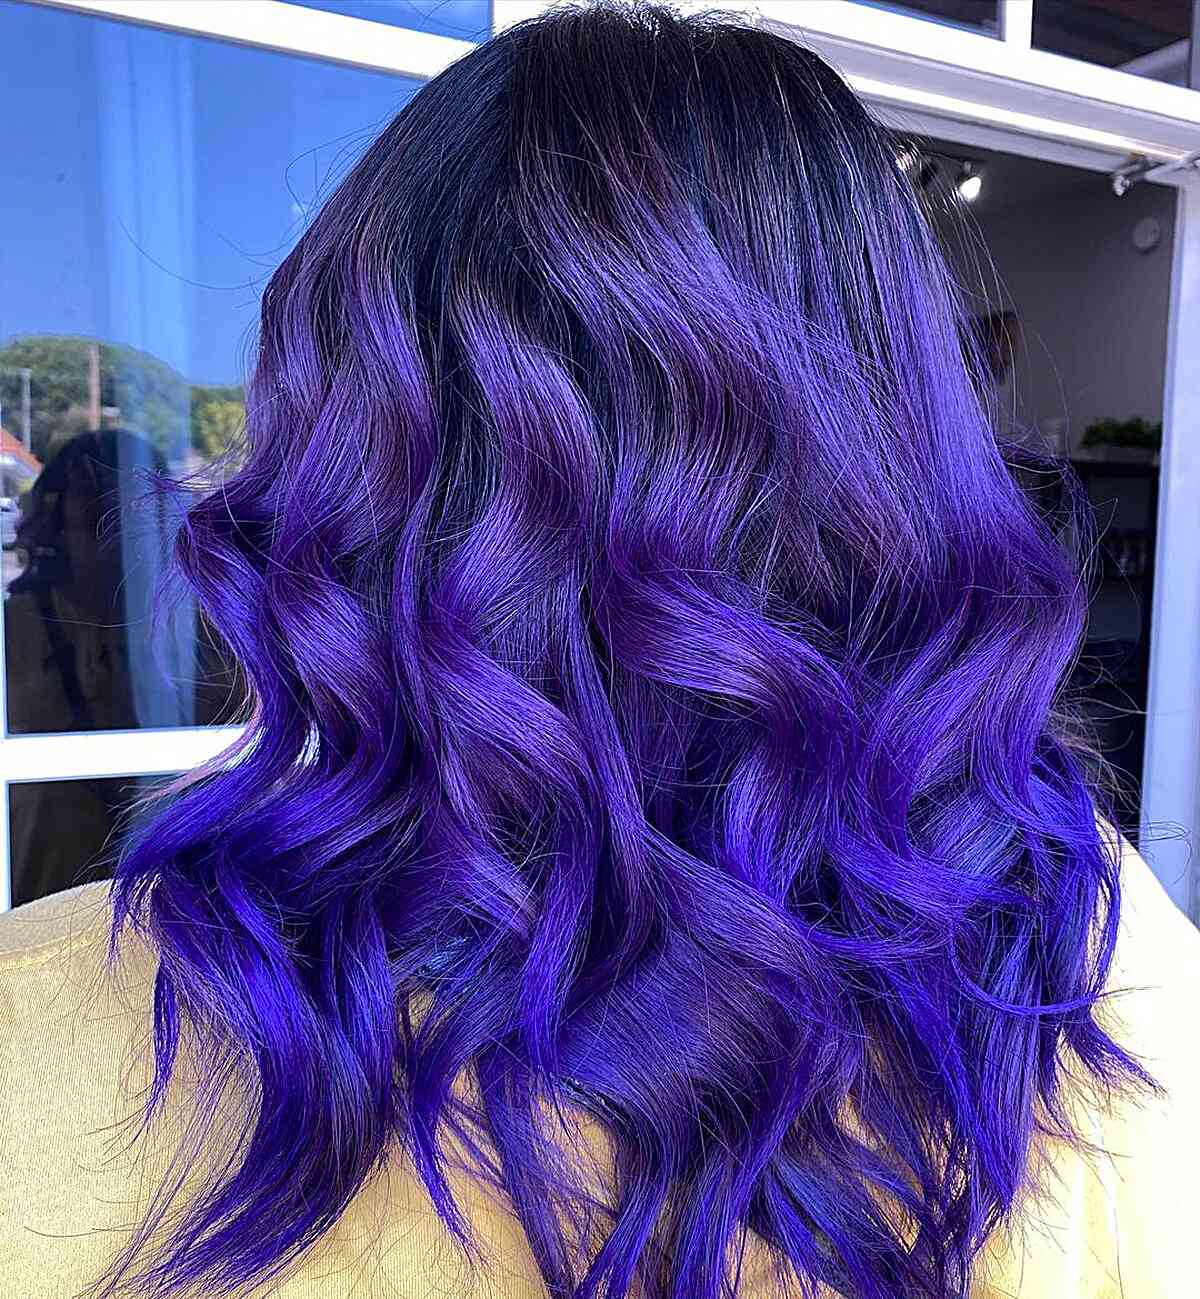 Radiant Purple Waves for women with thick mid-length hair